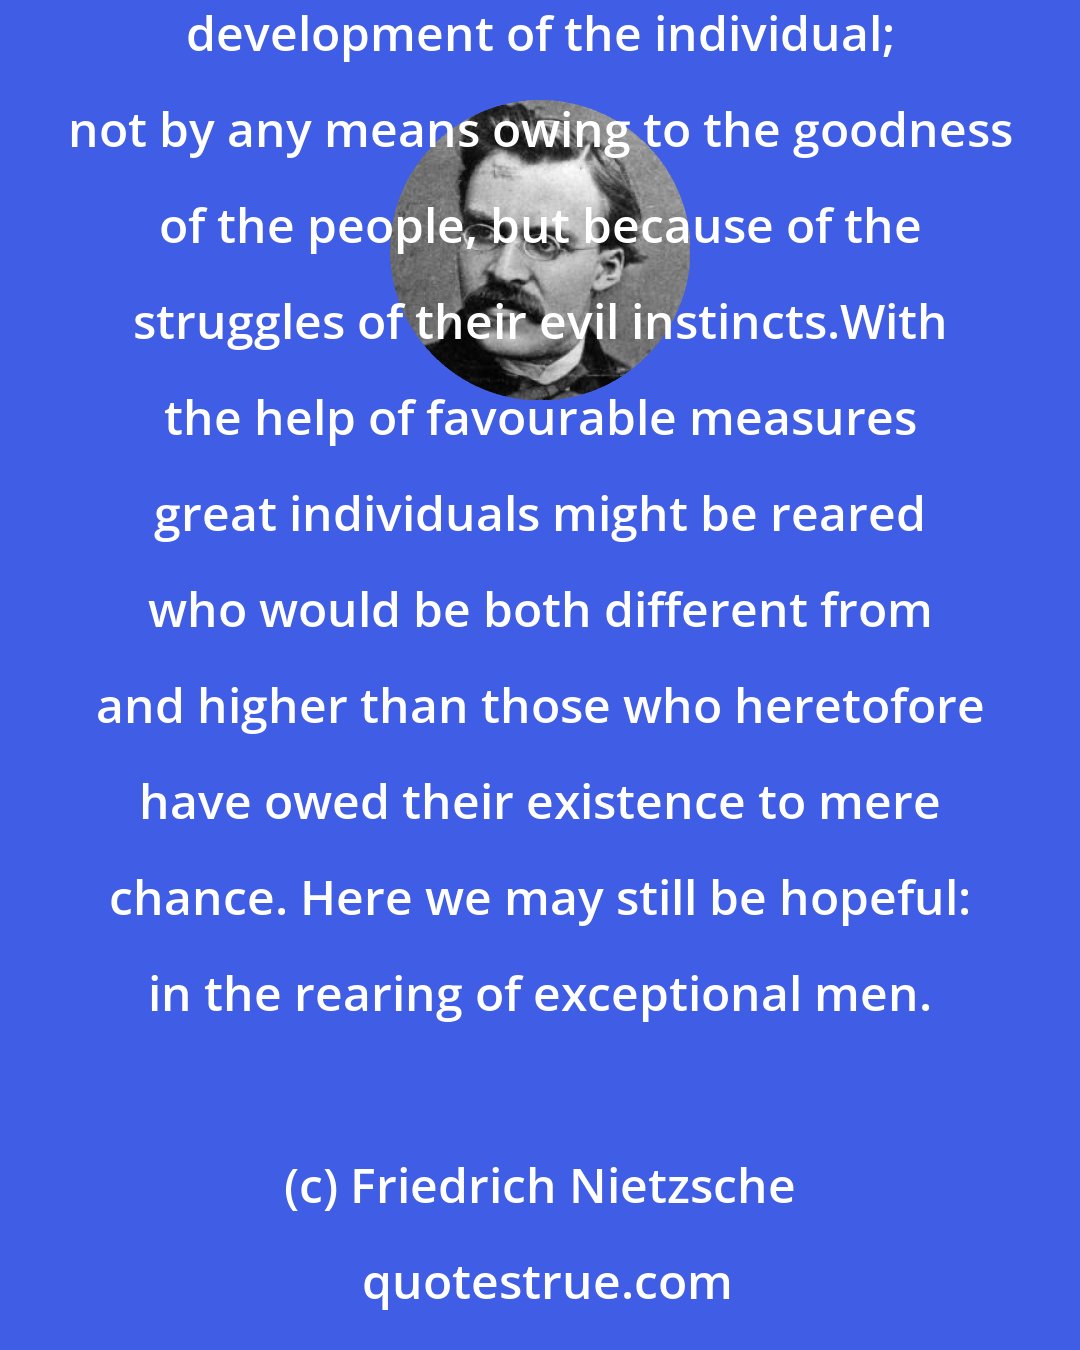 Friedrich Nietzsche: I am interested only in the relations of a people to the rearing of the individual man, and among the Greeks the conditions were unusually favourable for the development of the individual; not by any means owing to the goodness of the people, but because of the struggles of their evil instincts.With the help of favourable measures great individuals might be reared who would be both different from and higher than those who heretofore have owed their existence to mere chance. Here we may still be hopeful: in the rearing of exceptional men.